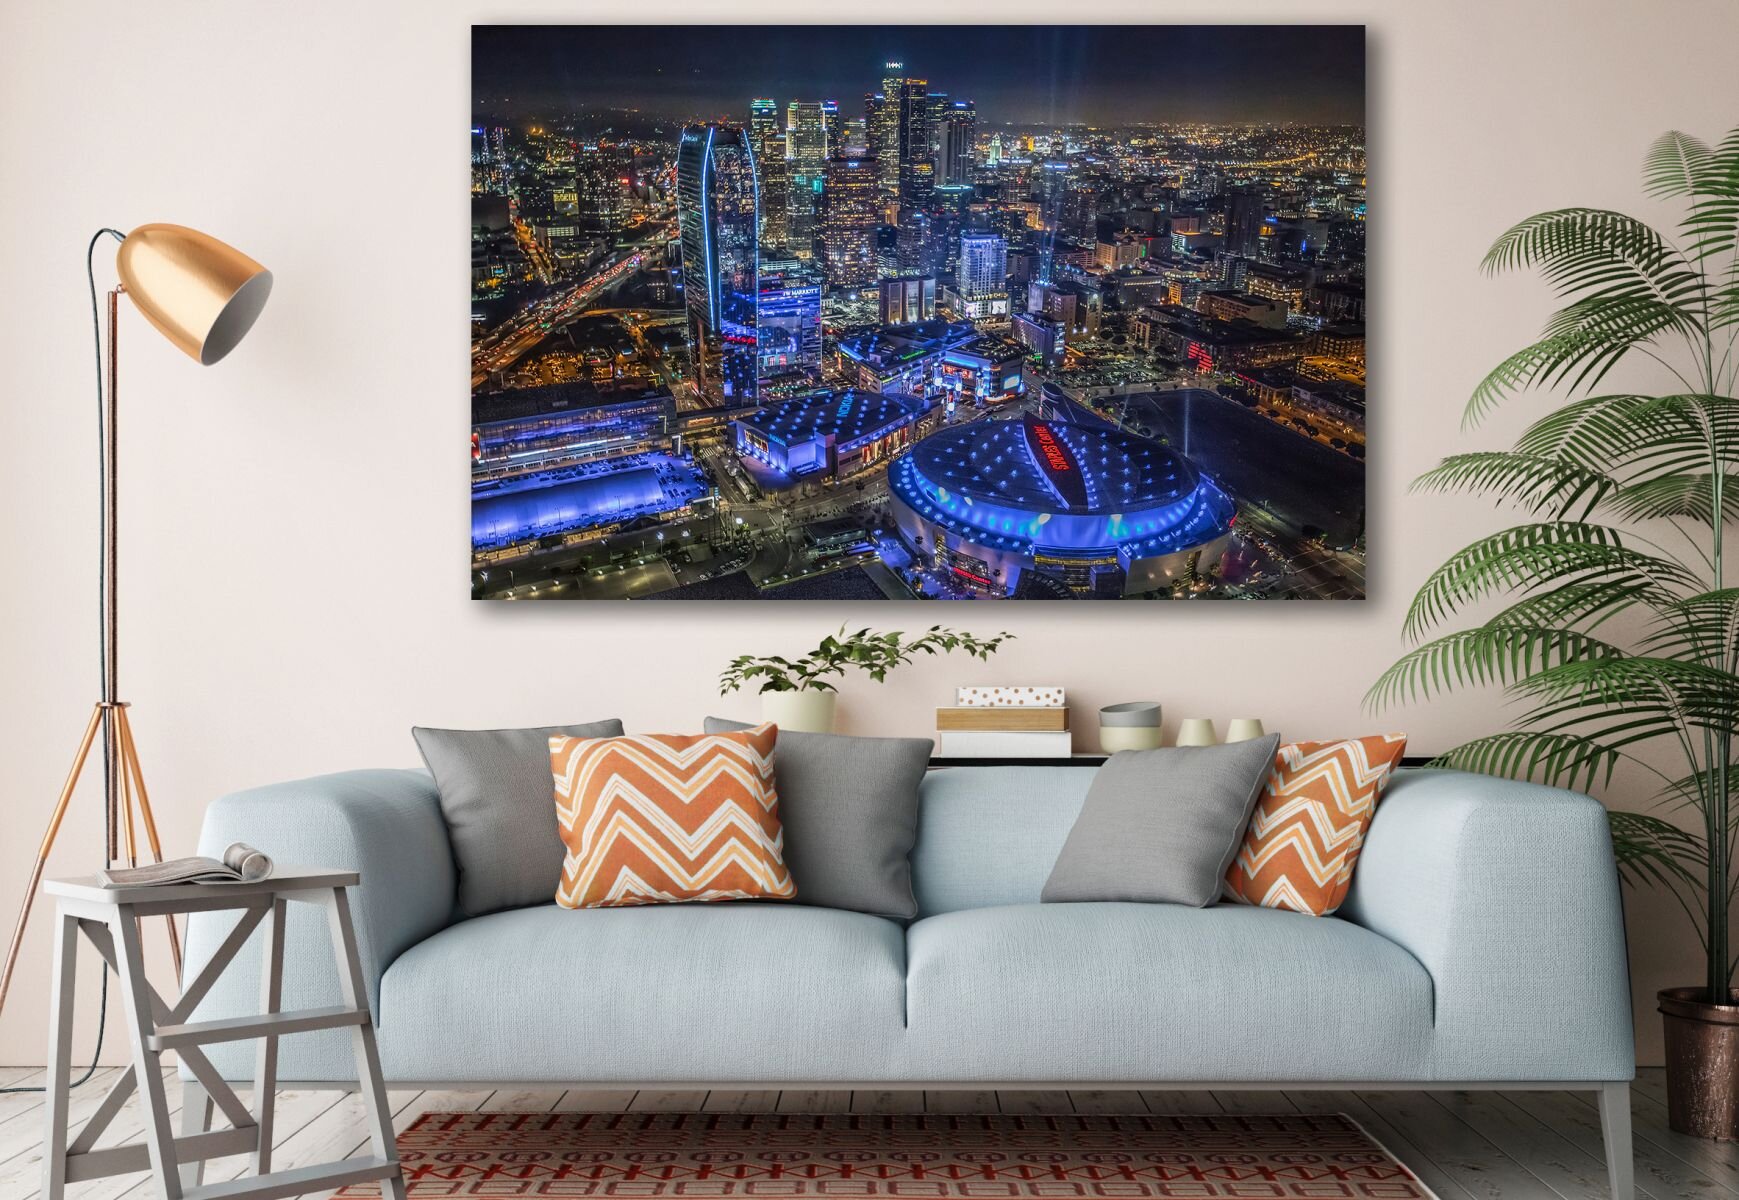 Bless international Los Angeles Staples Center City Skyline Prints Painting  Canvas Large Canvas Art Rise Of Buildings Downtown Decor Wall On Canvas  Print